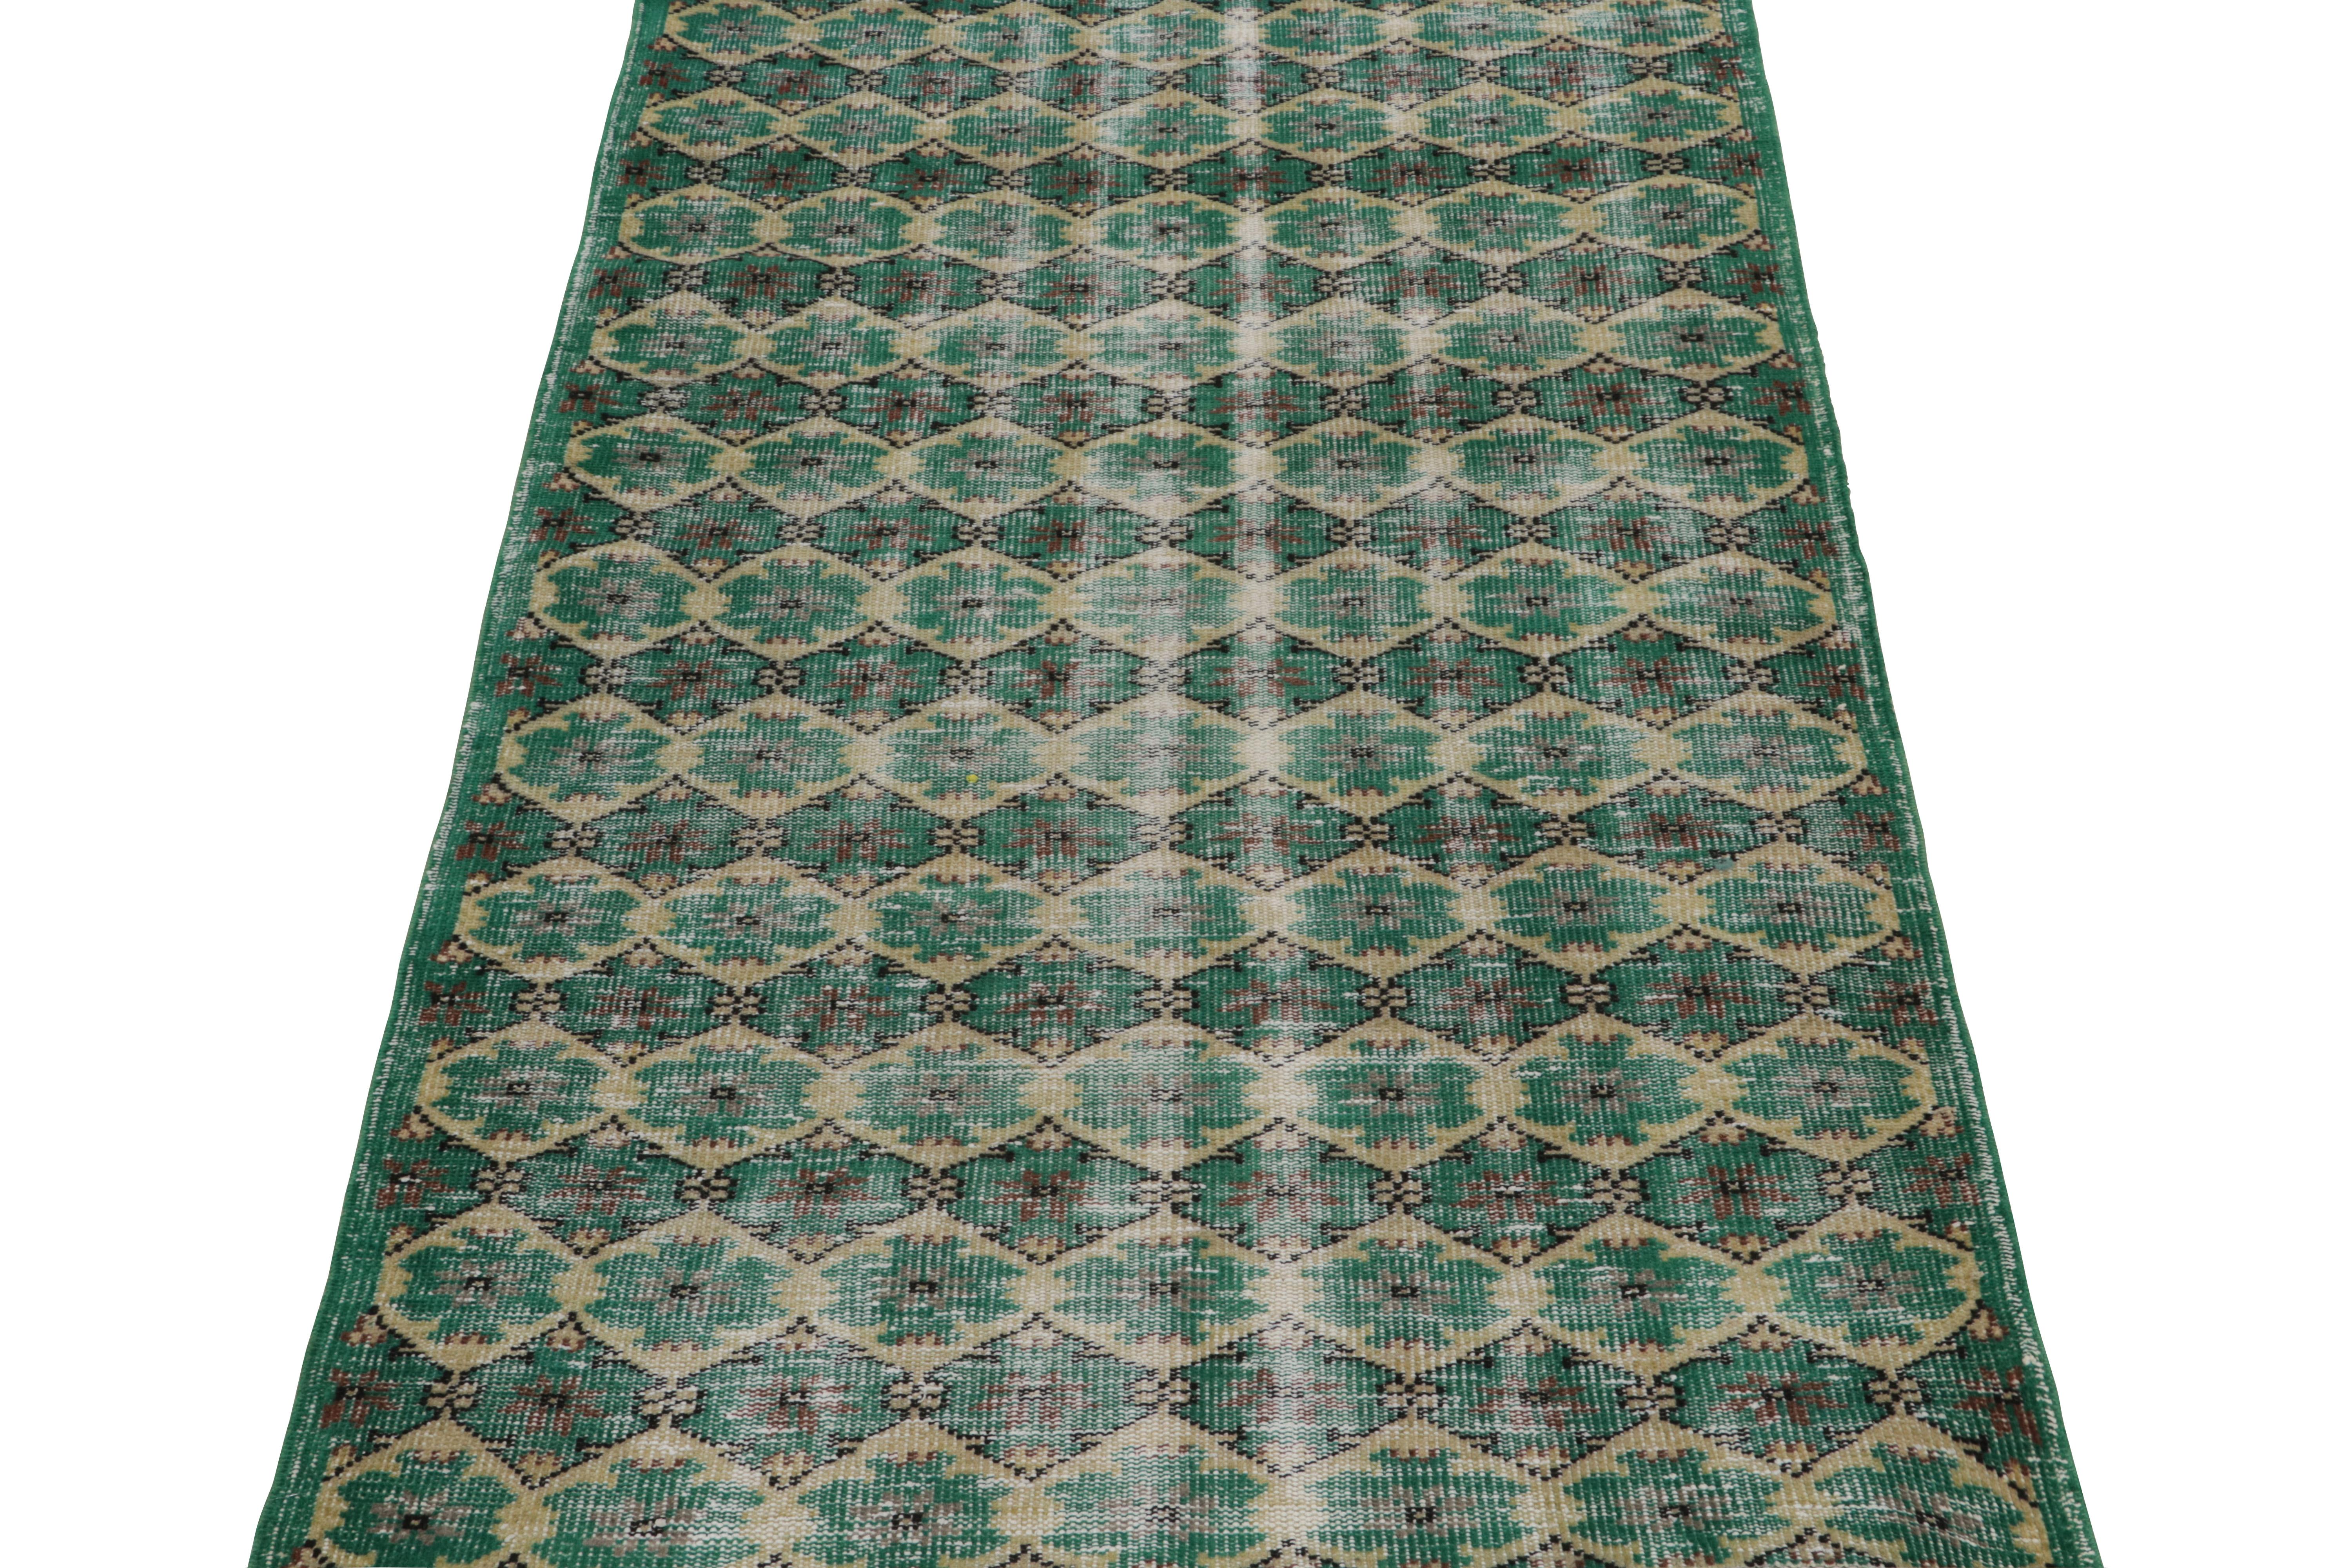 Turkish 1960s Vintage Distressed Rug in Teal Green Lattice Patterns with by Rug & Kilim For Sale